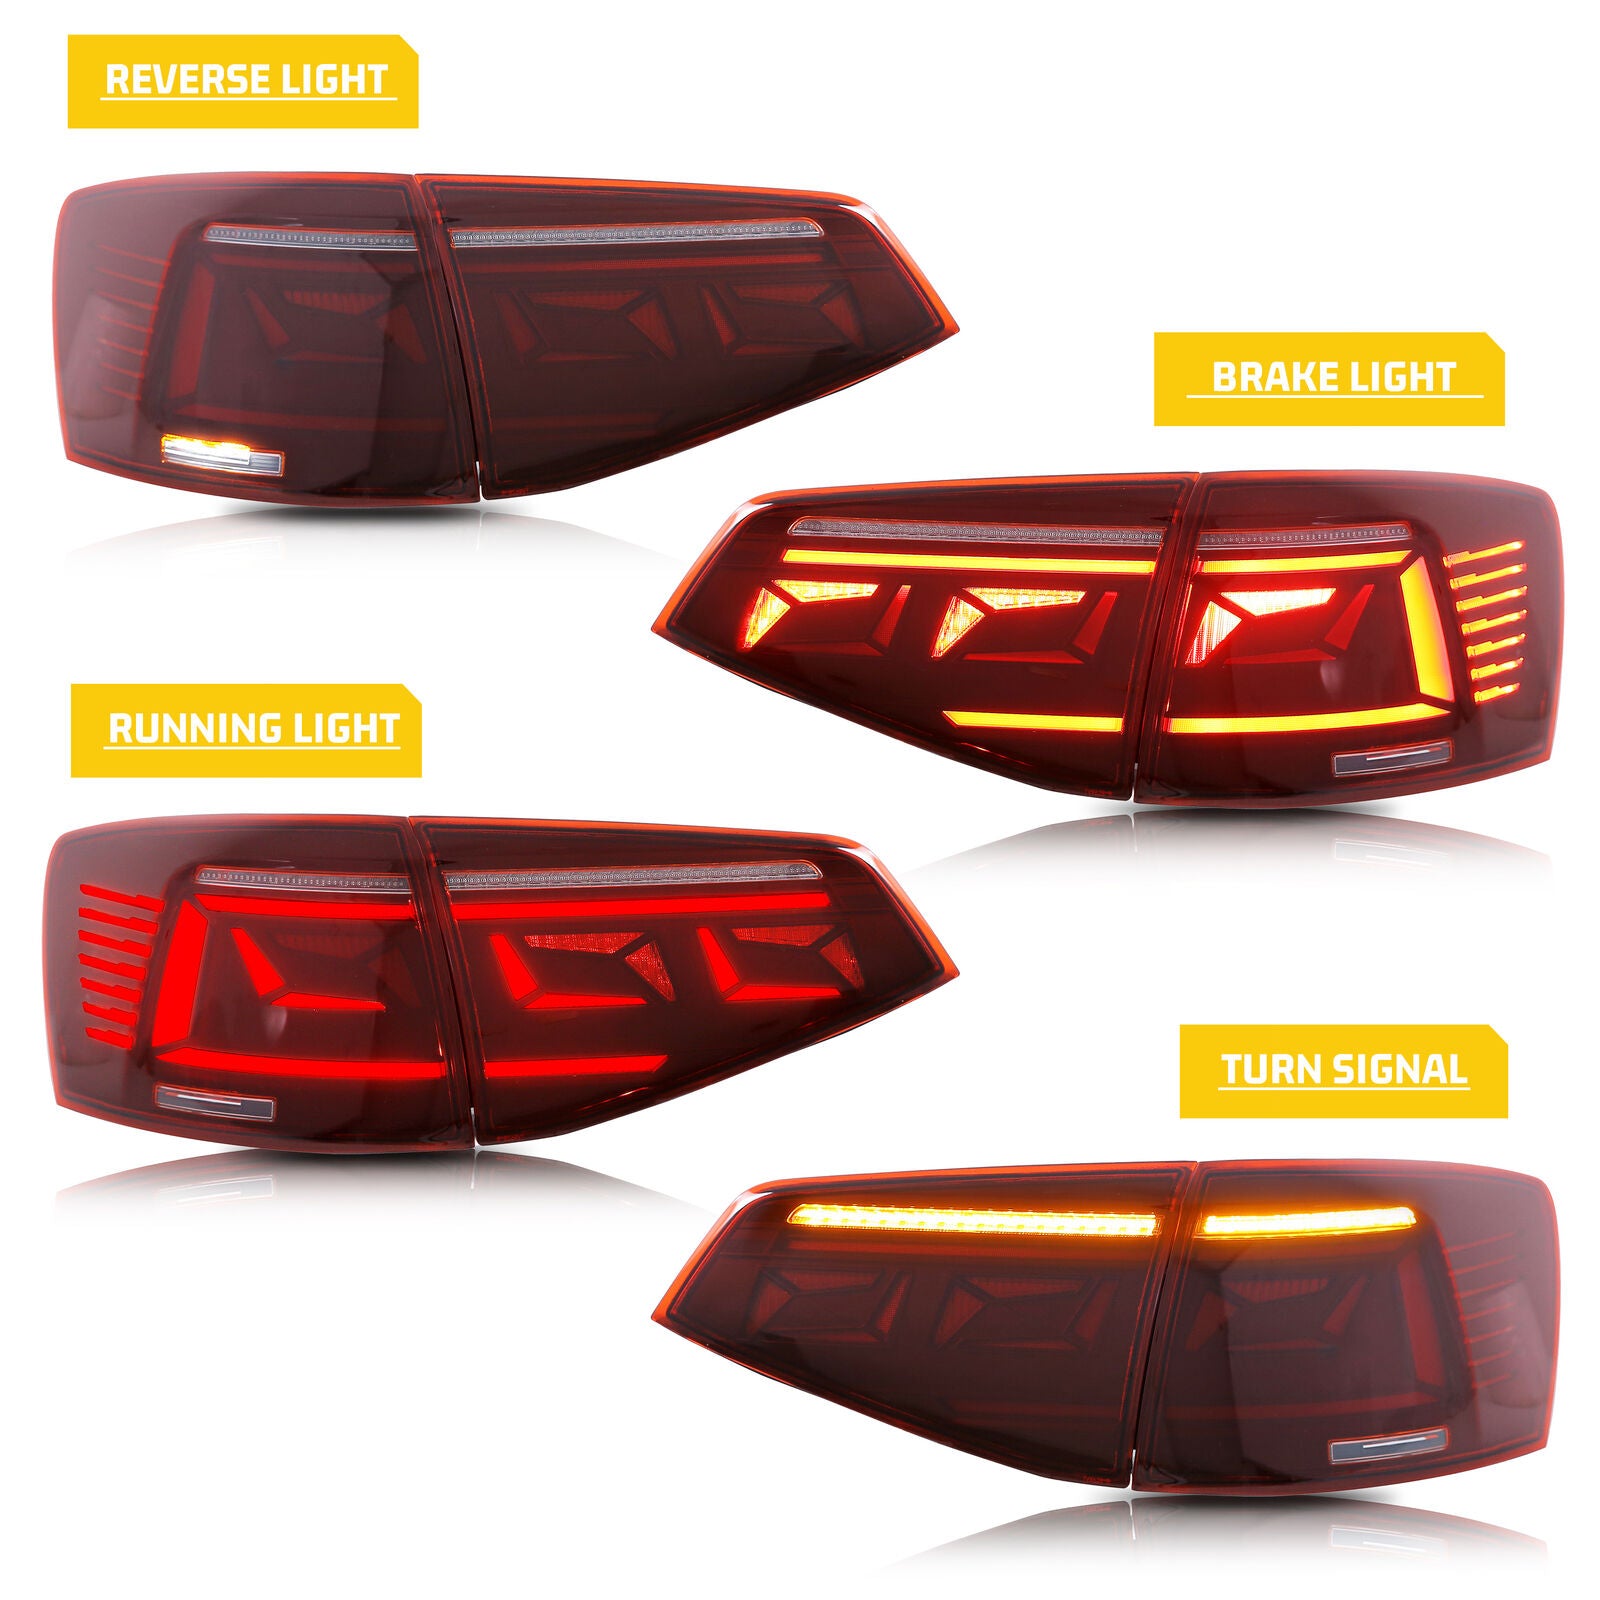 inginuity time LED Tail Lights for VW Volkswagen Jetta 2015 2017 – Inginuity Time